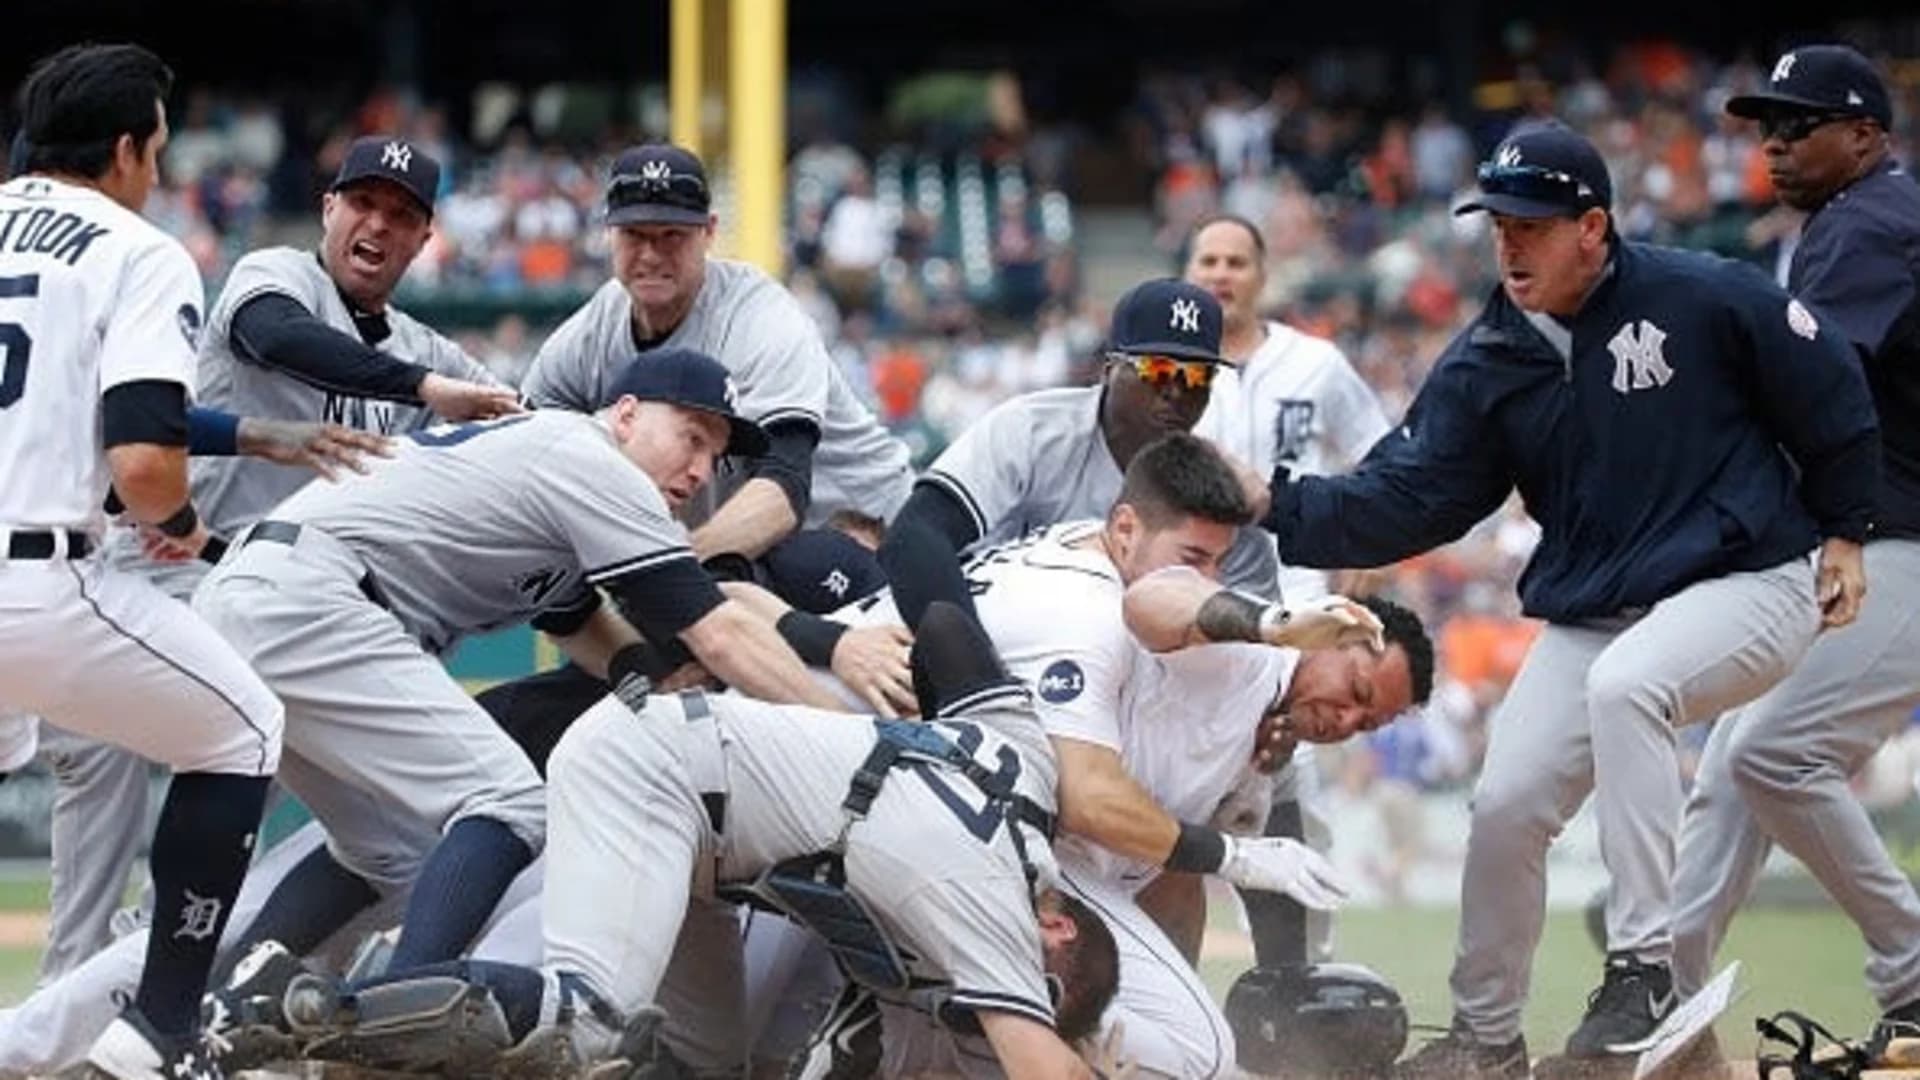 Tigers' Cabrera banned 7 games, Yankees' Sanchez 4 for fight